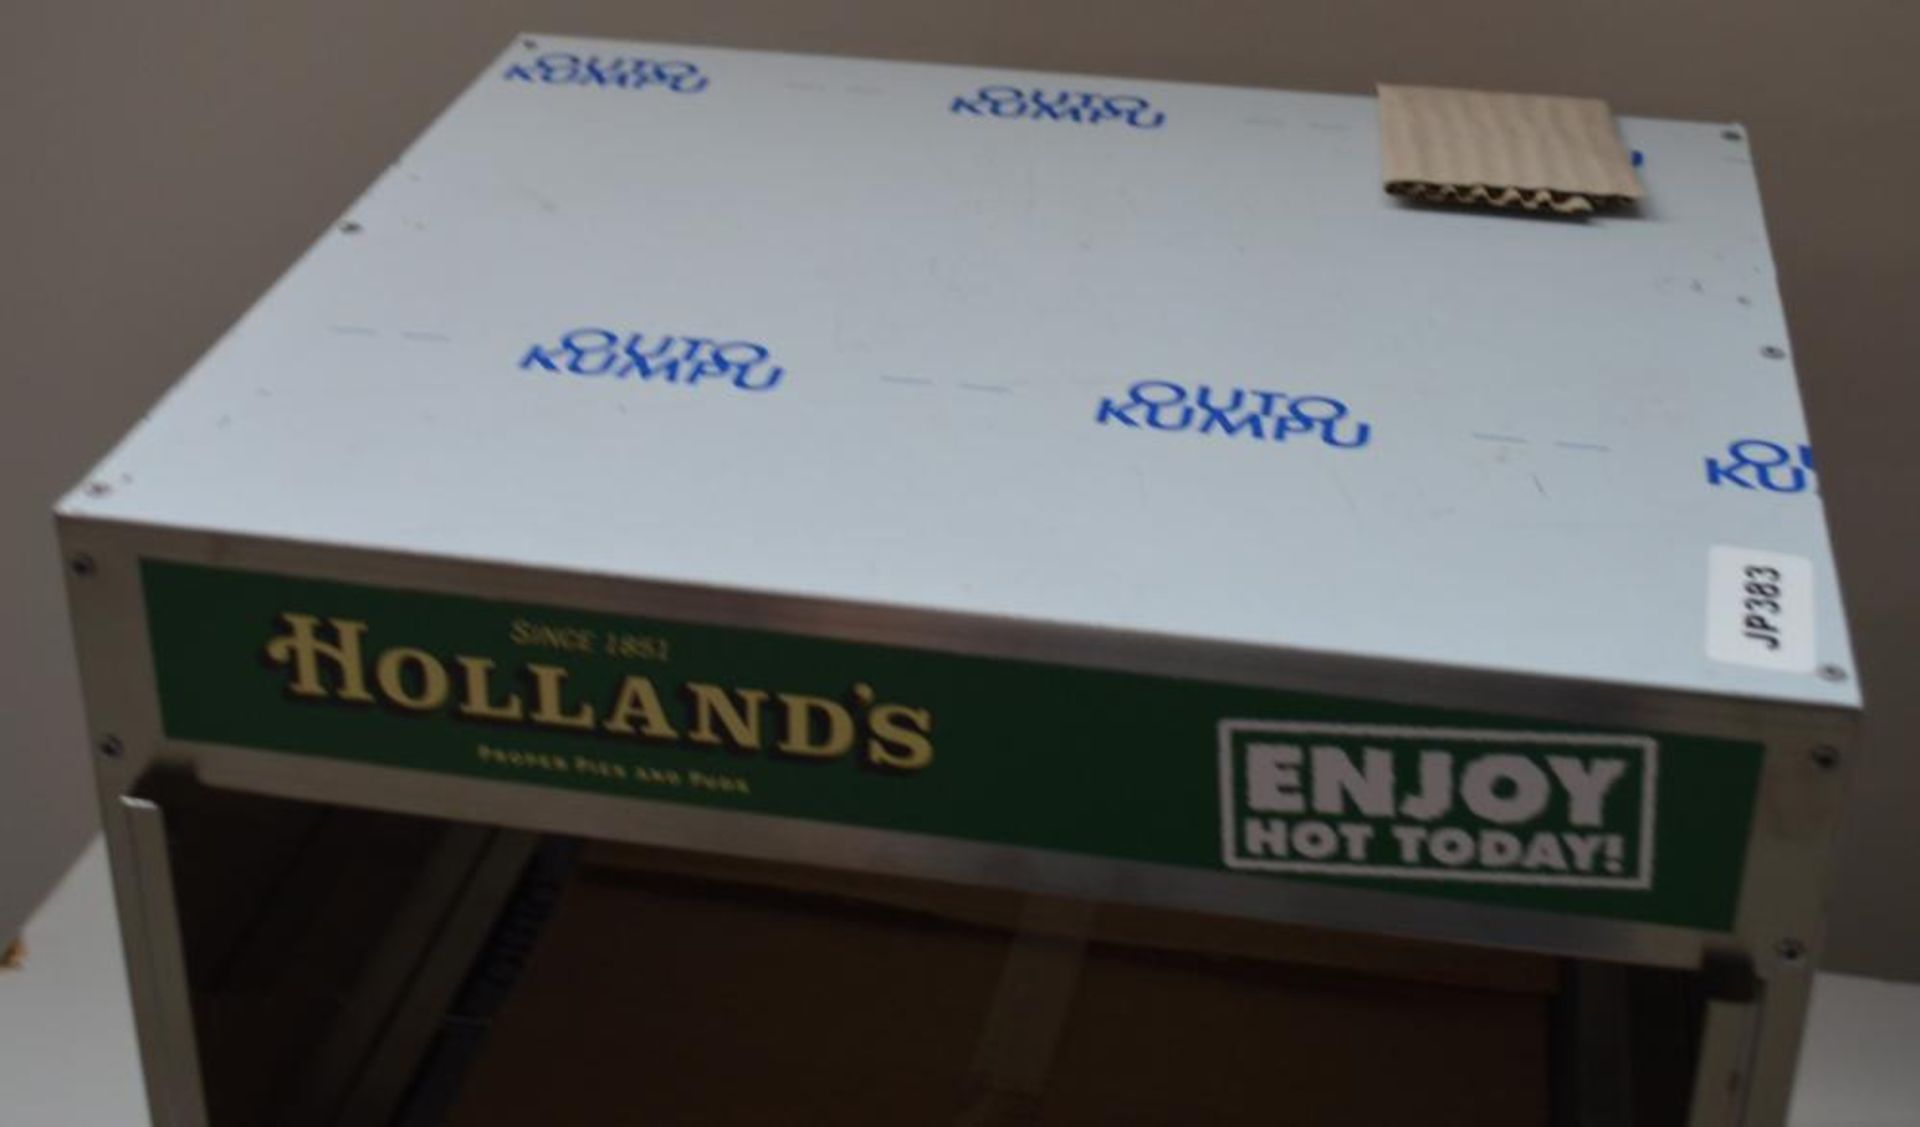 1 x Parry Electric Pie Warming Cabinet - Hollands Pie Edition - New and Unused - Features - Image 5 of 9